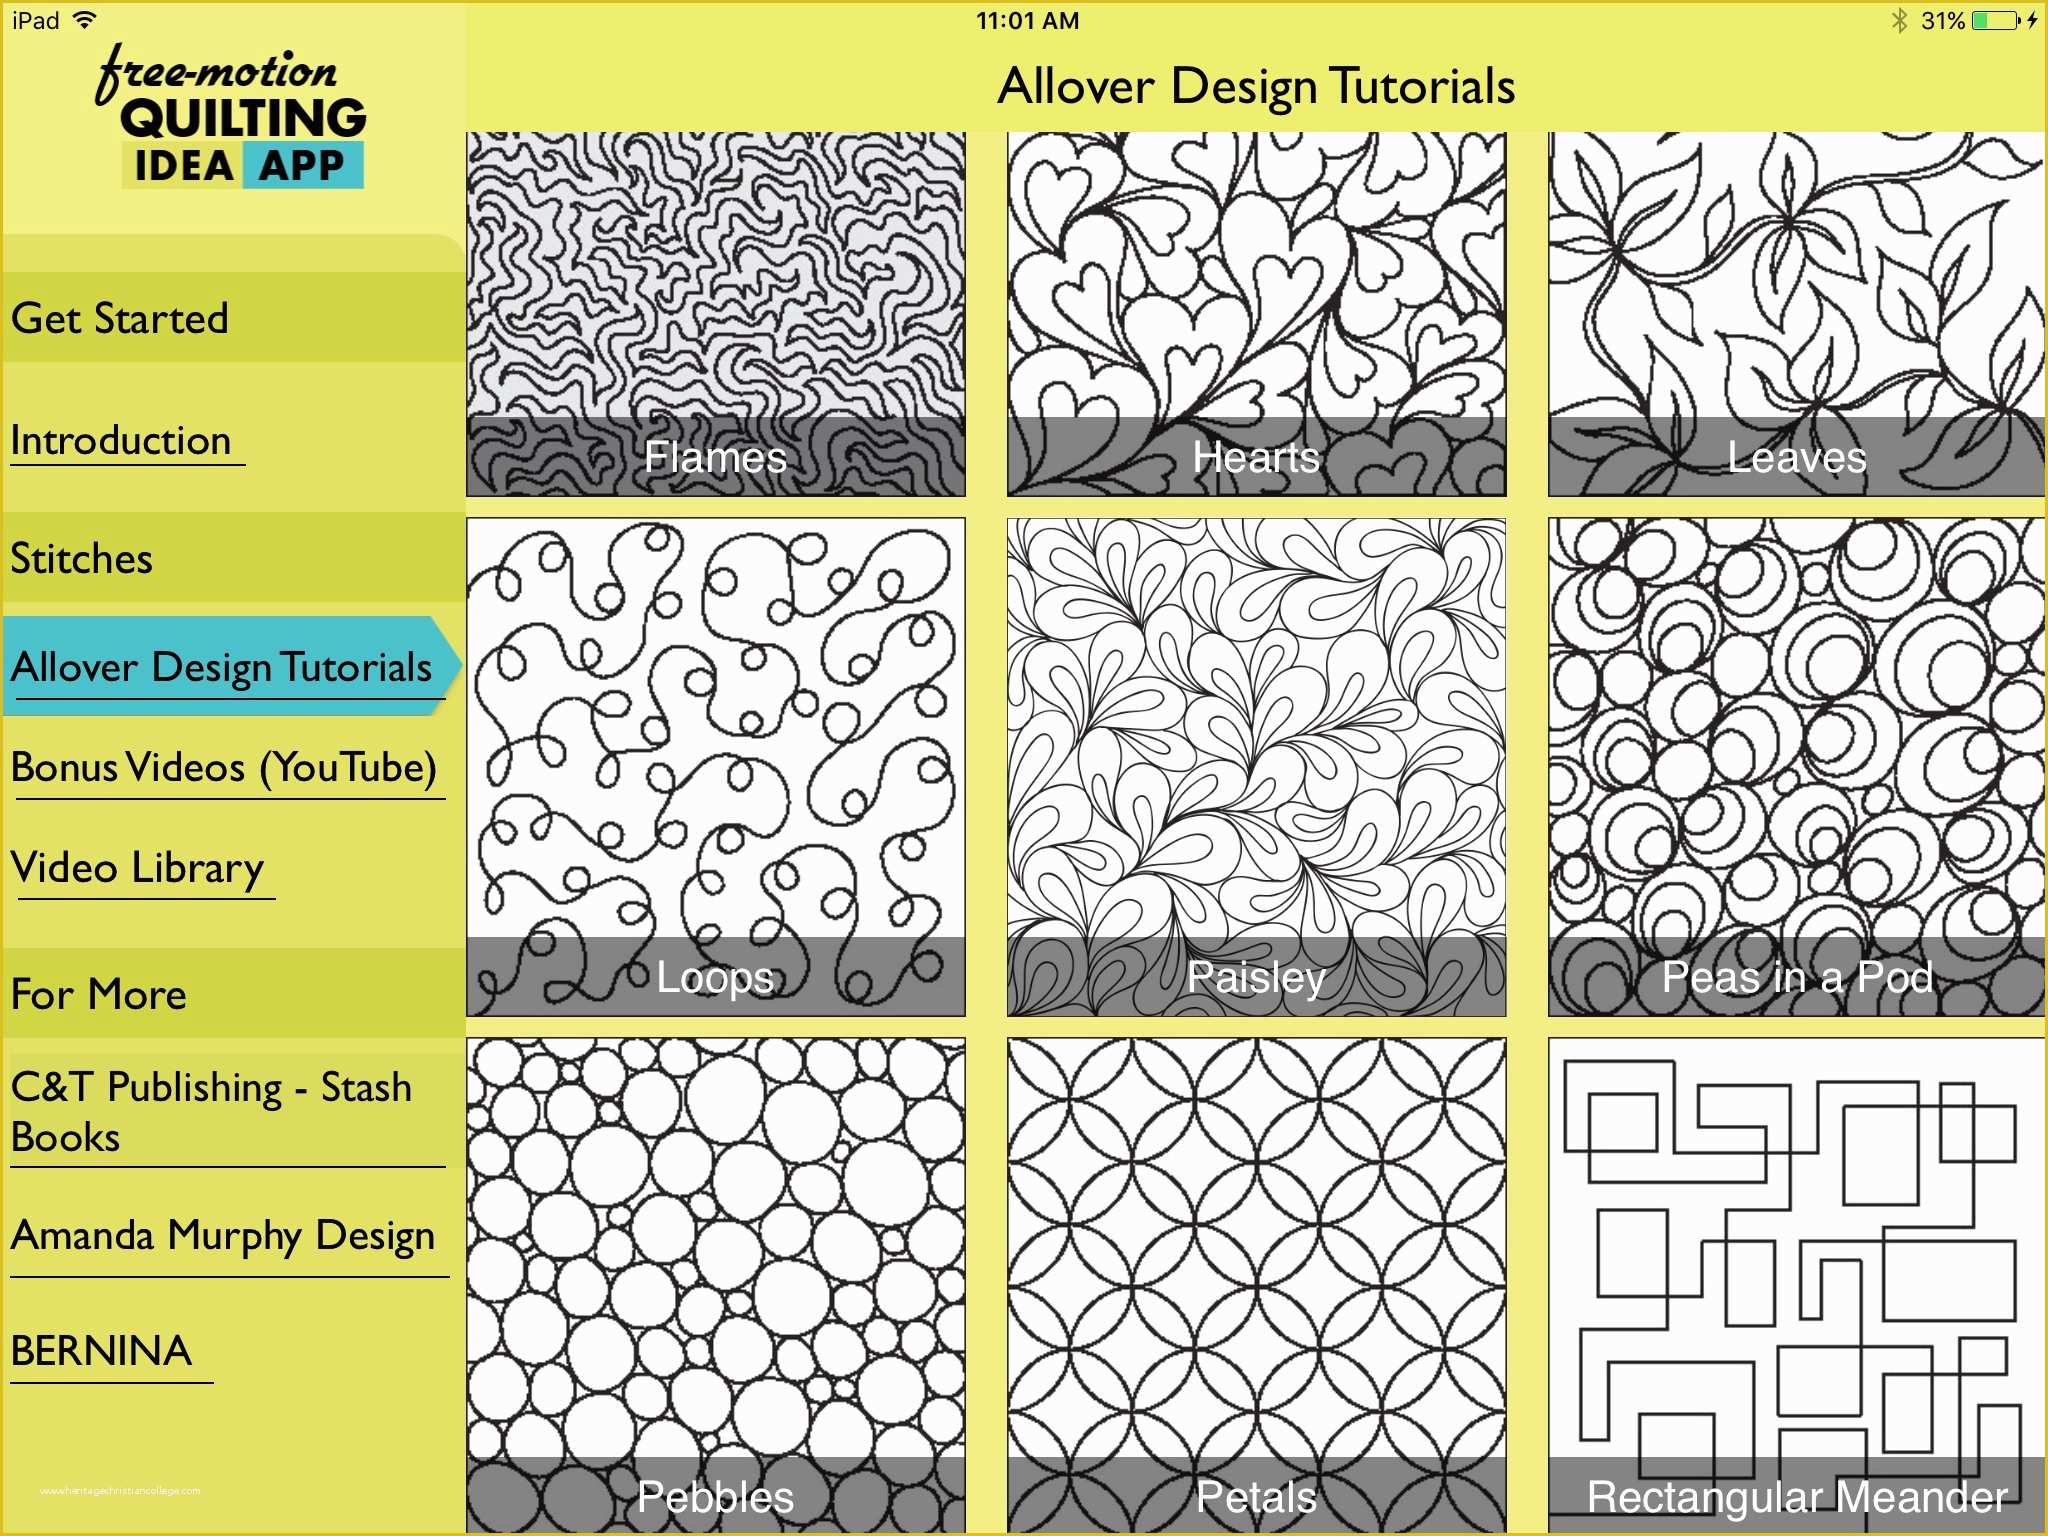 Free Motion Quilting with Templates Of the Free Motion Quilting Idea App – Amanda’s Blog